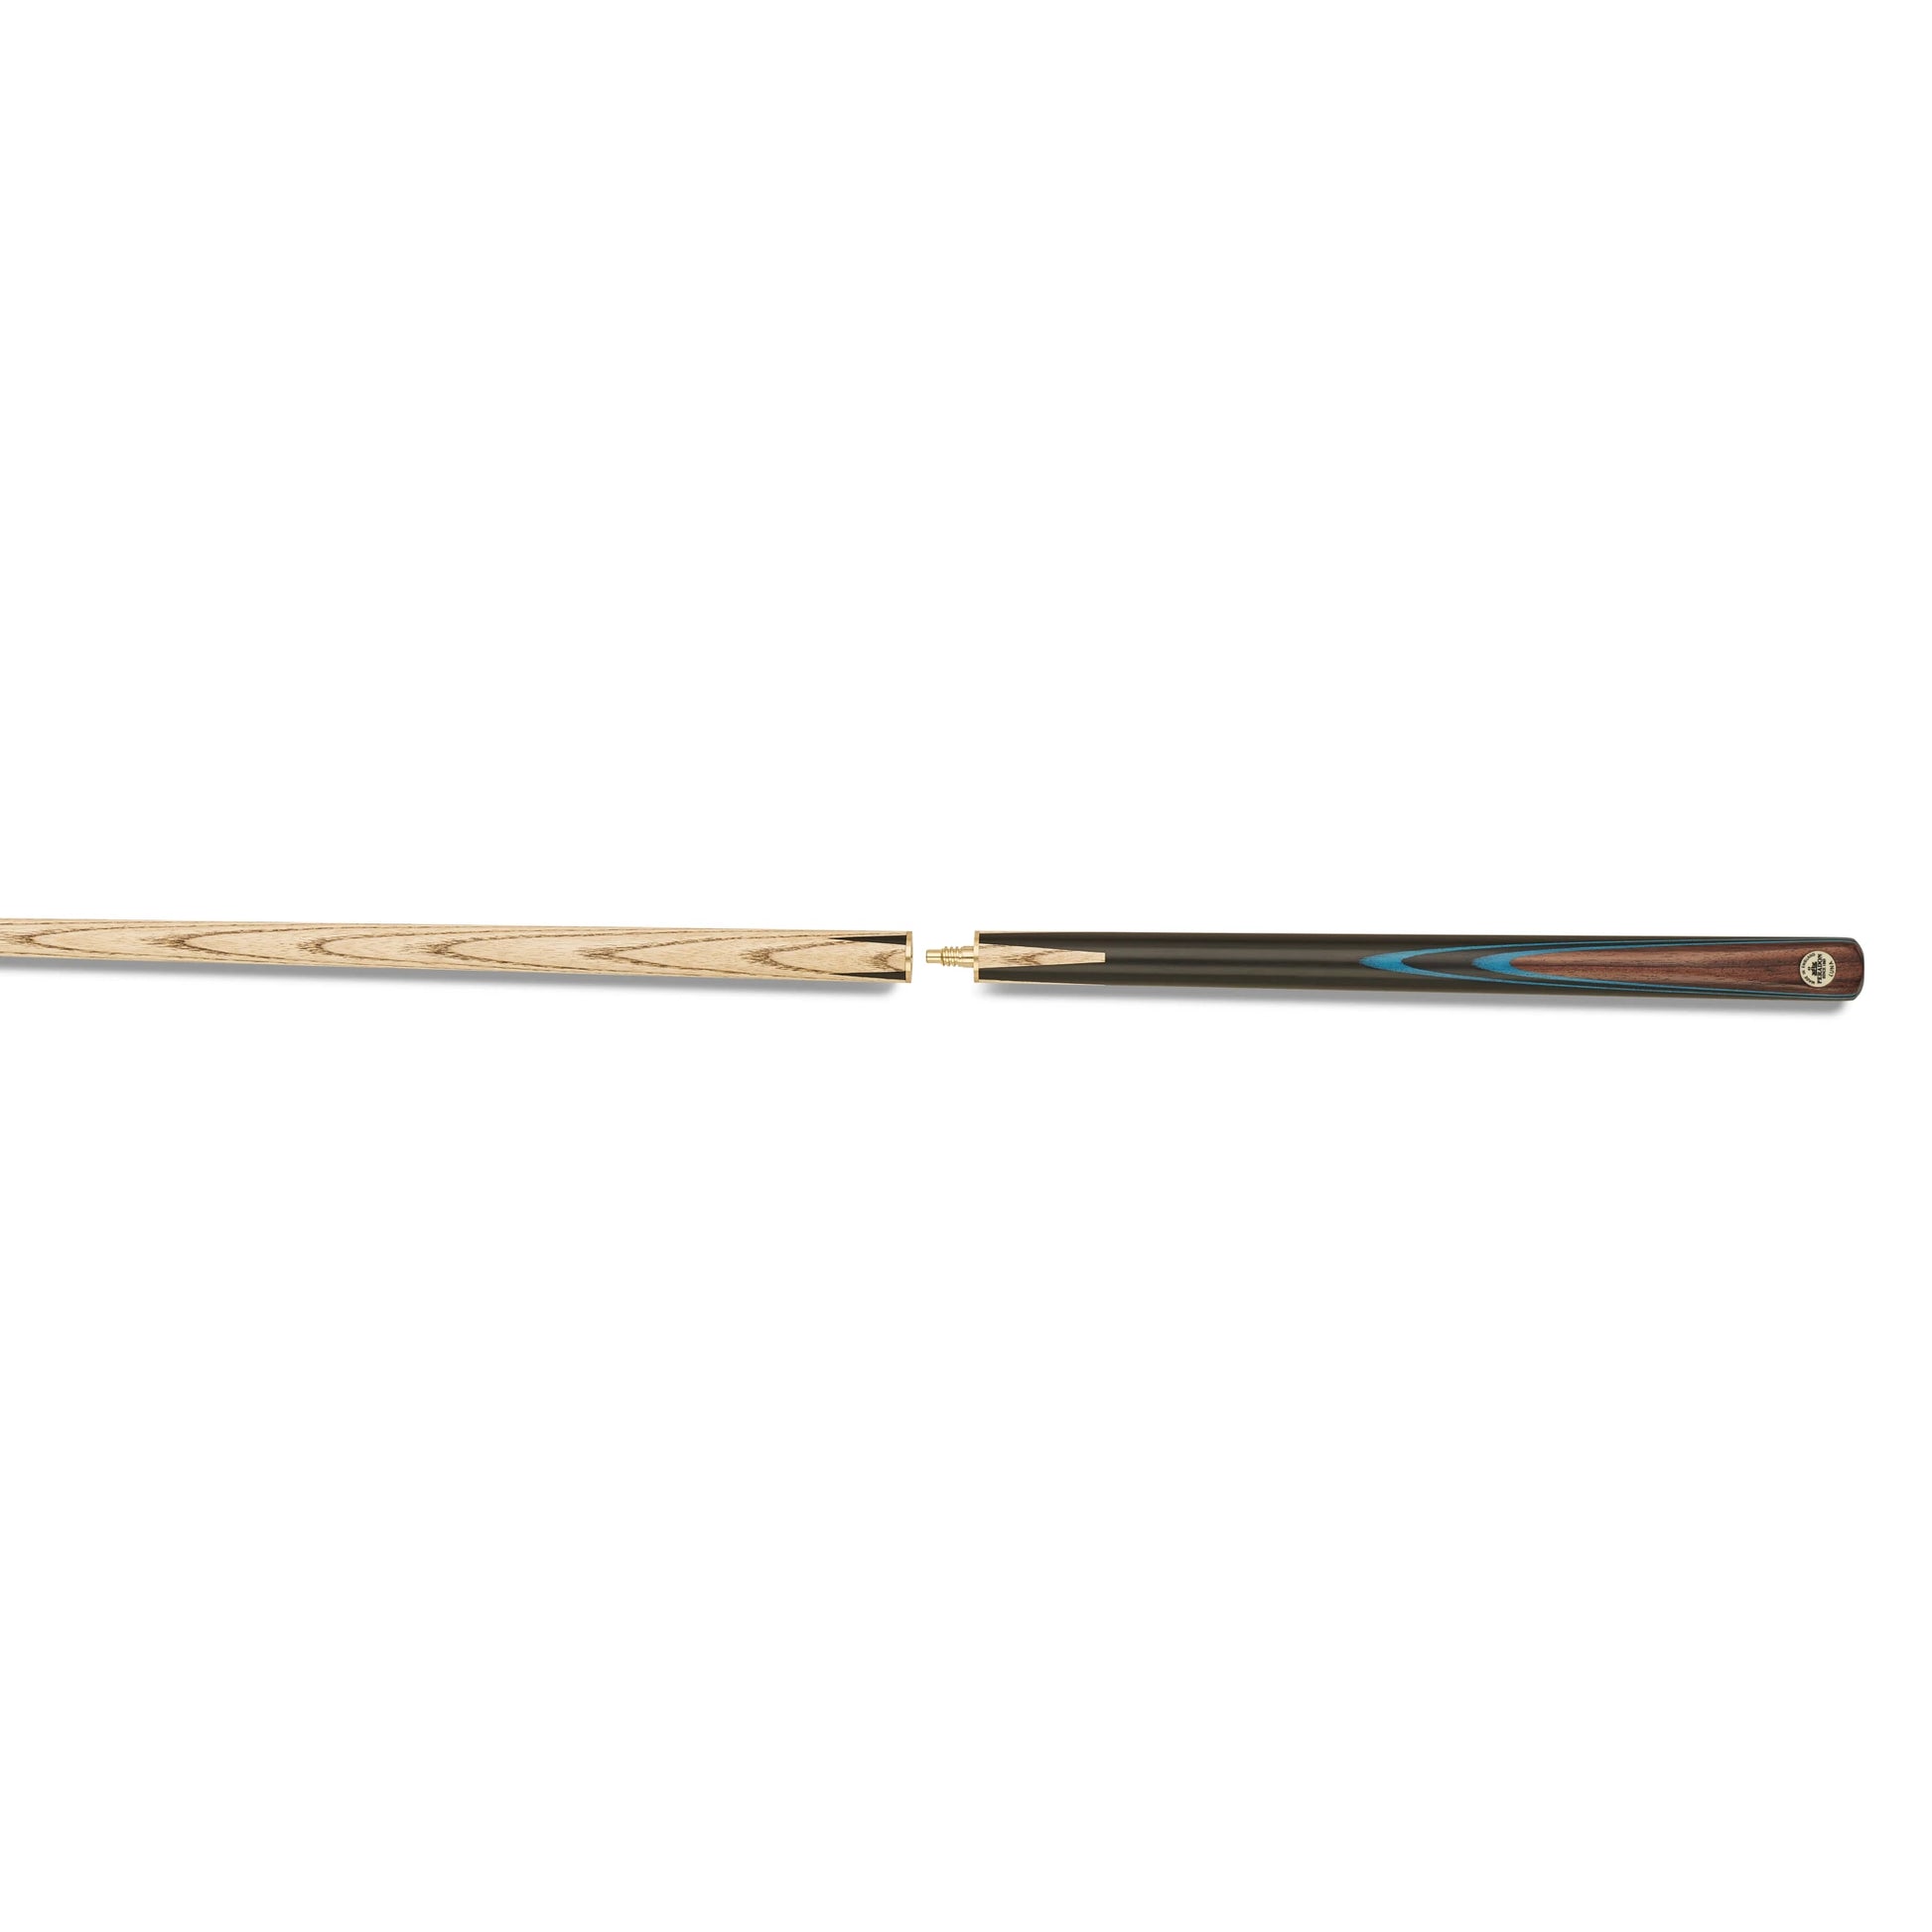 Peradon Luna ¾ Jointed 8 Ball Pool Cue with Mini Butt